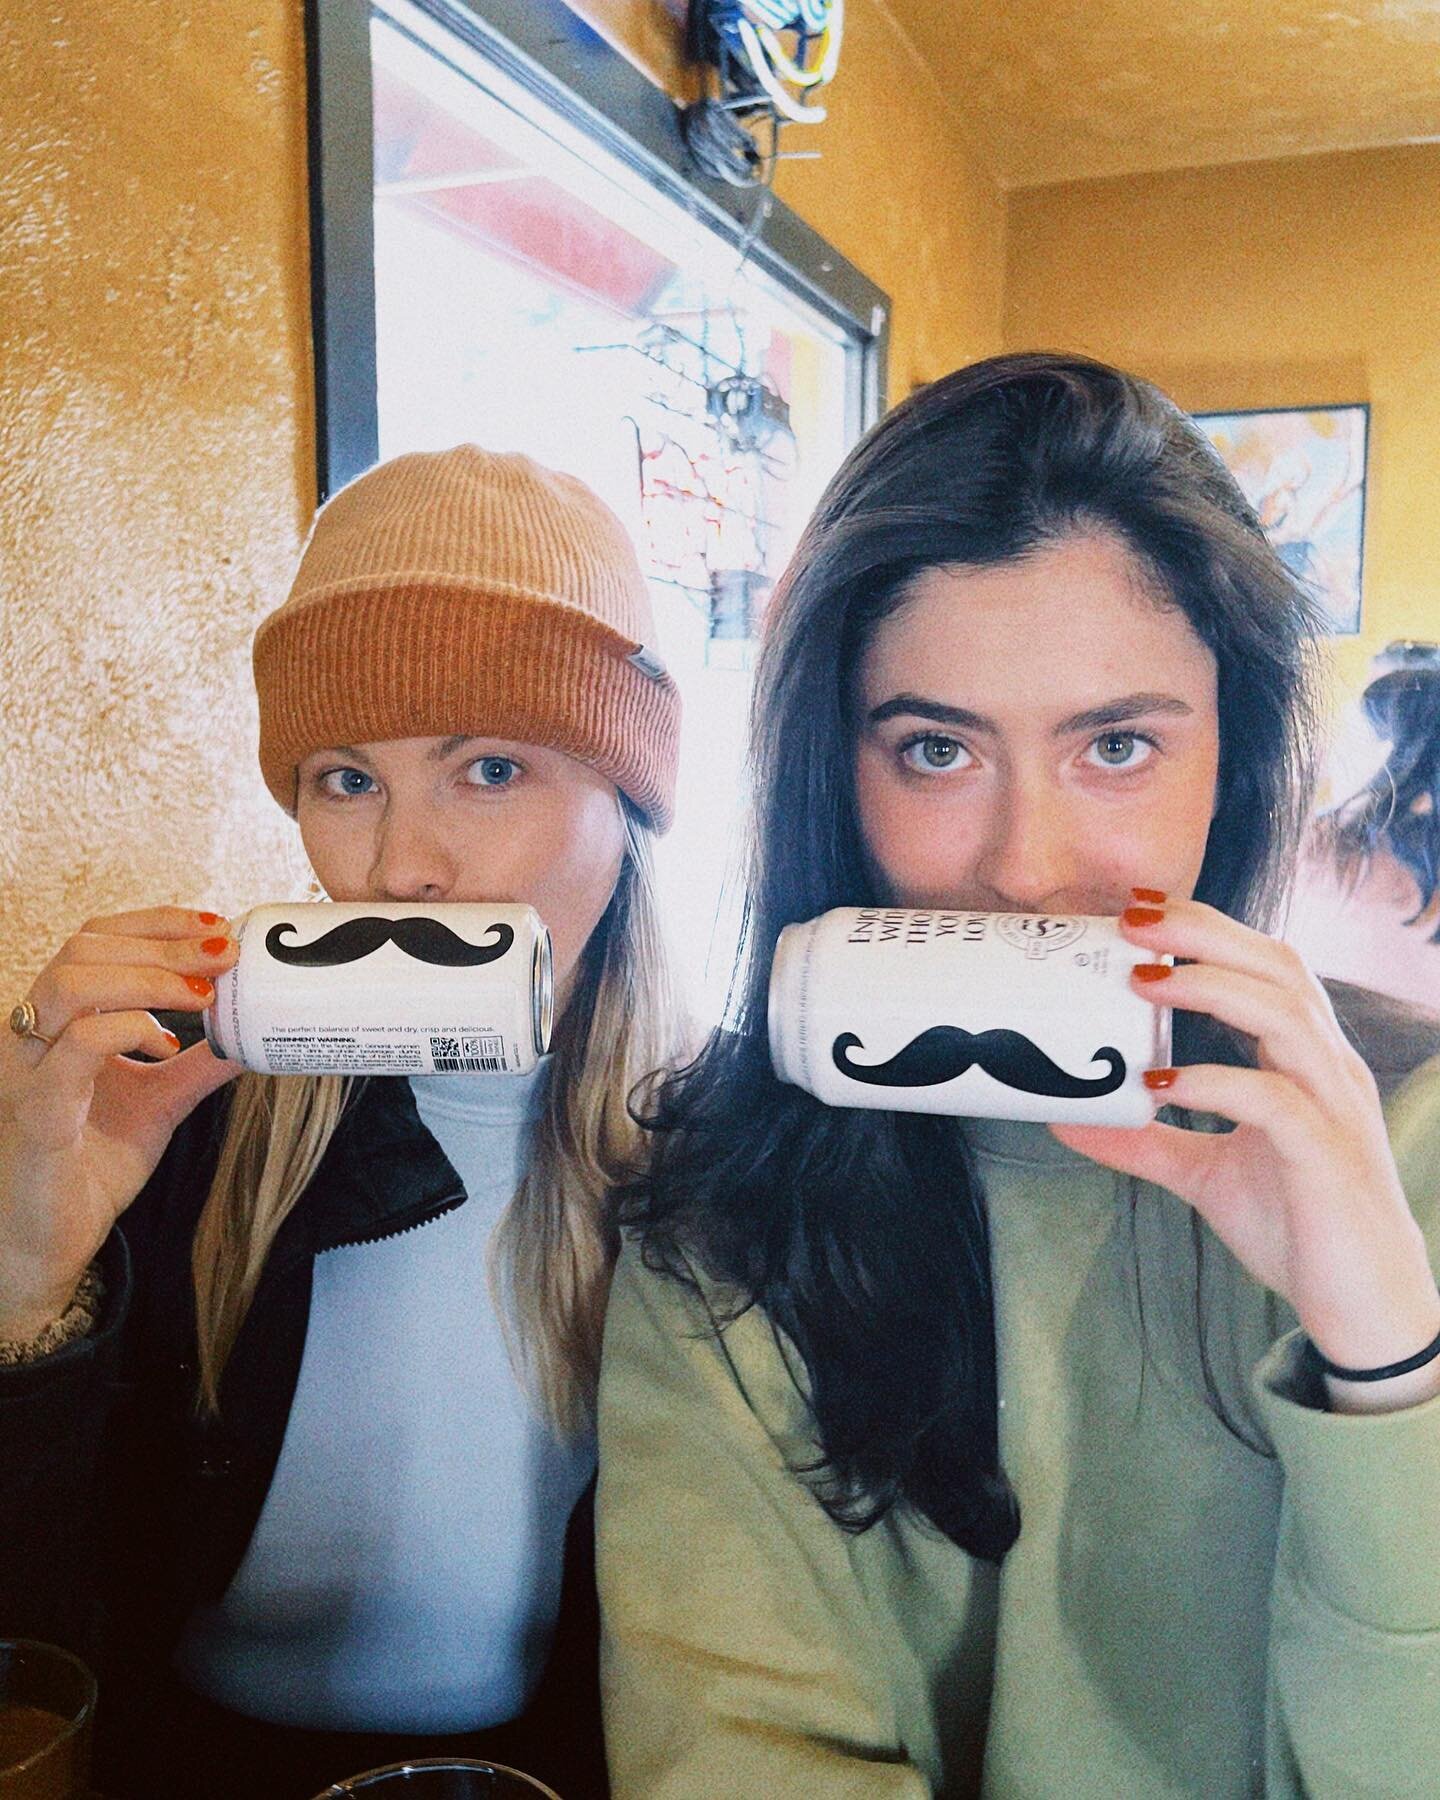 &ldquo;the mustaches were fabulous, and the mountains were great too&rdquo; &ndash; our review of crested butte